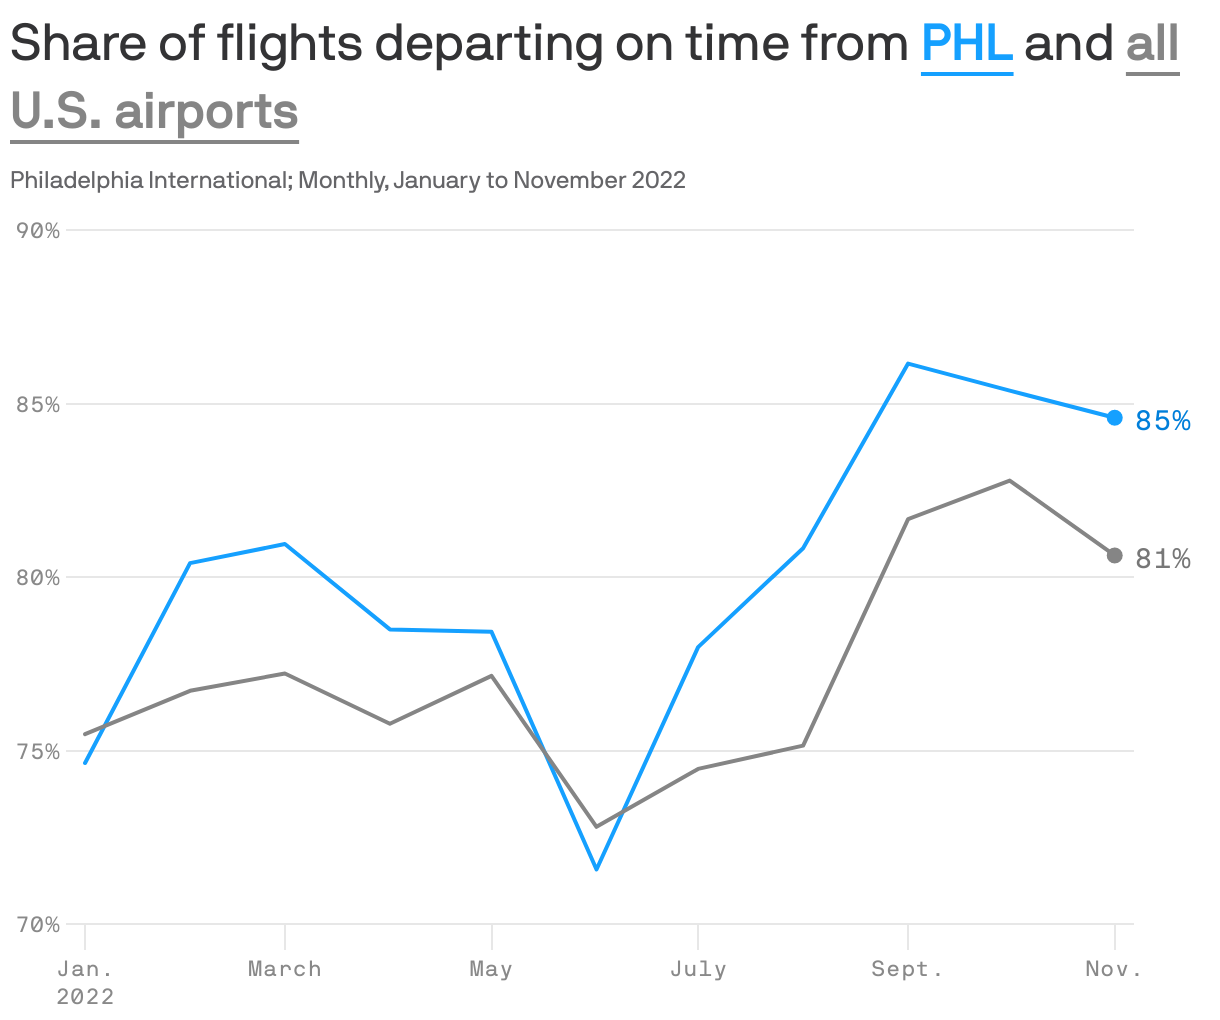 Share of flights departing on time from <b style='text-decoration: underline; text-underline-position: under; color: #15a0ff;'>PHL</b> and  <b style='text-decoration: underline; text-underline-position: under; color: #858585;'>all U.S. airports</b>